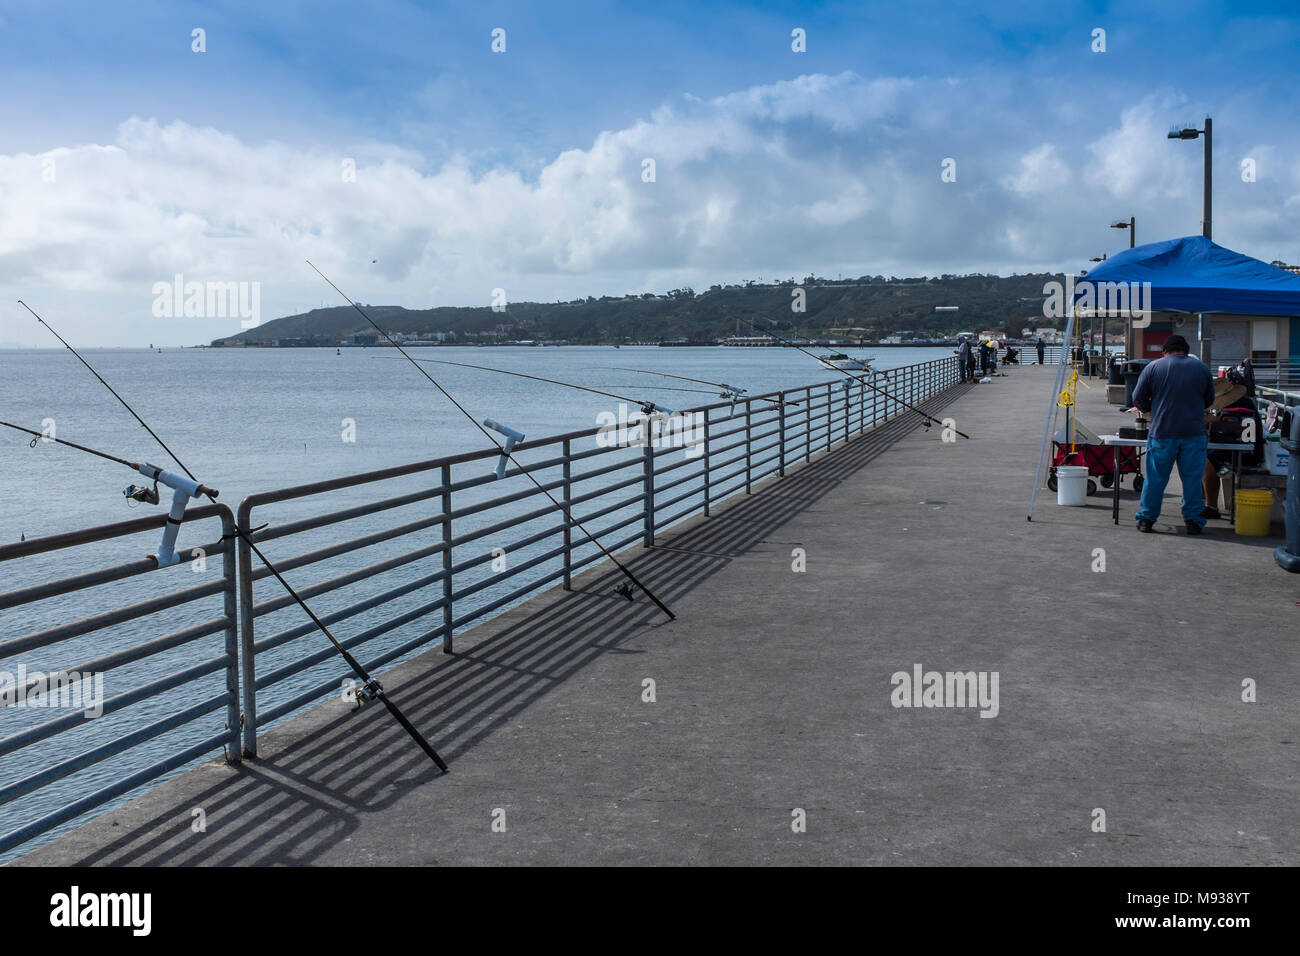 SAN DIEGO, CALIFORNIA, USA - Fishing rods on the pier at Shelter Island in San Diego. Stock Photo